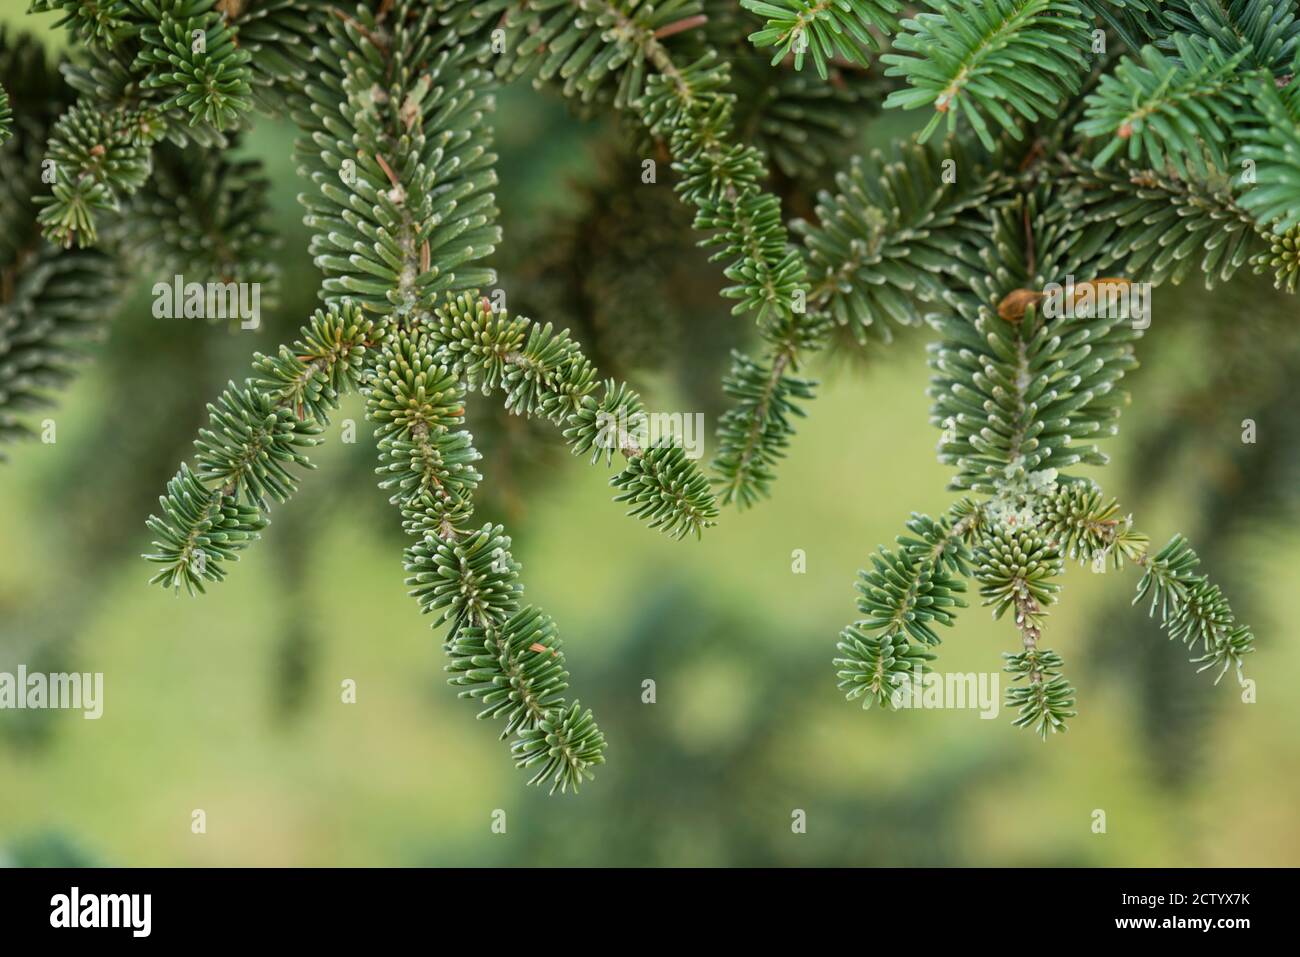 Norway Spruce Tree Detail Of Leaves Stock Photo Alamy